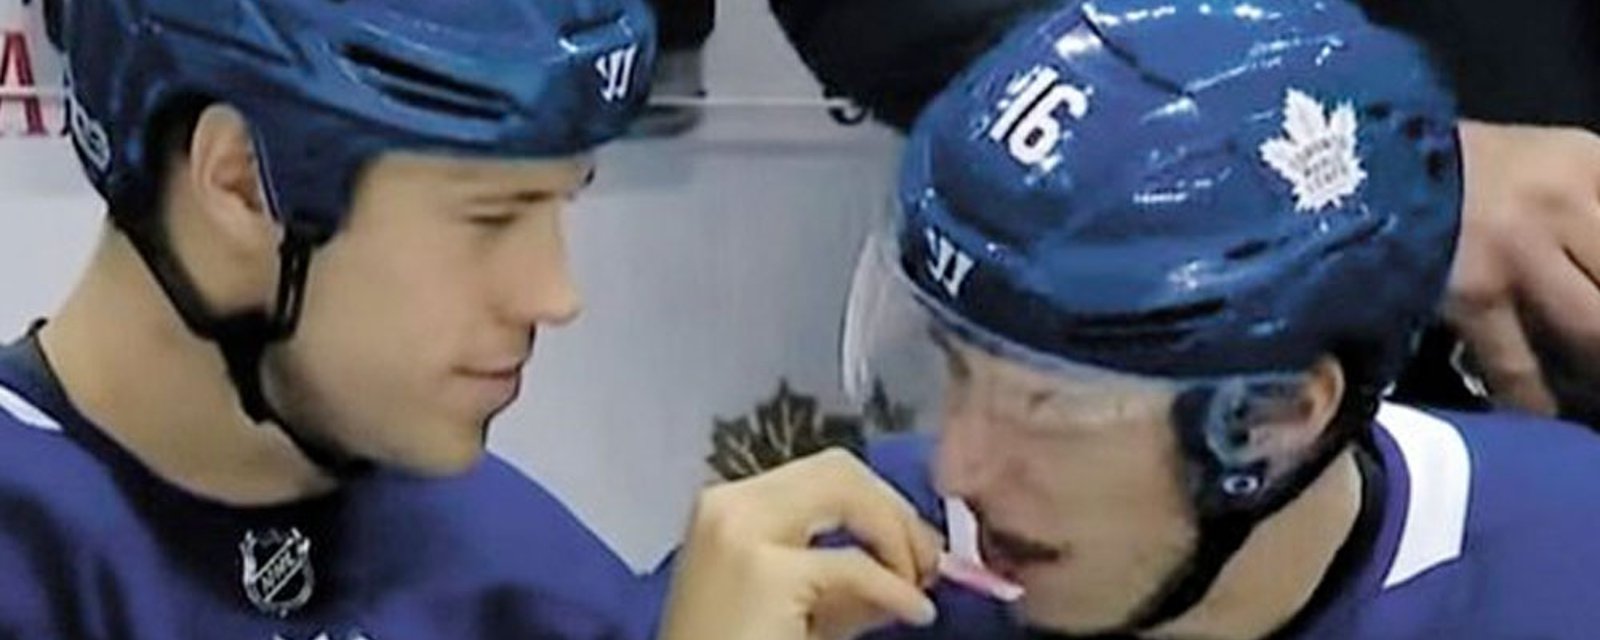 Cancel culture’s next target in hockey: smelling salts